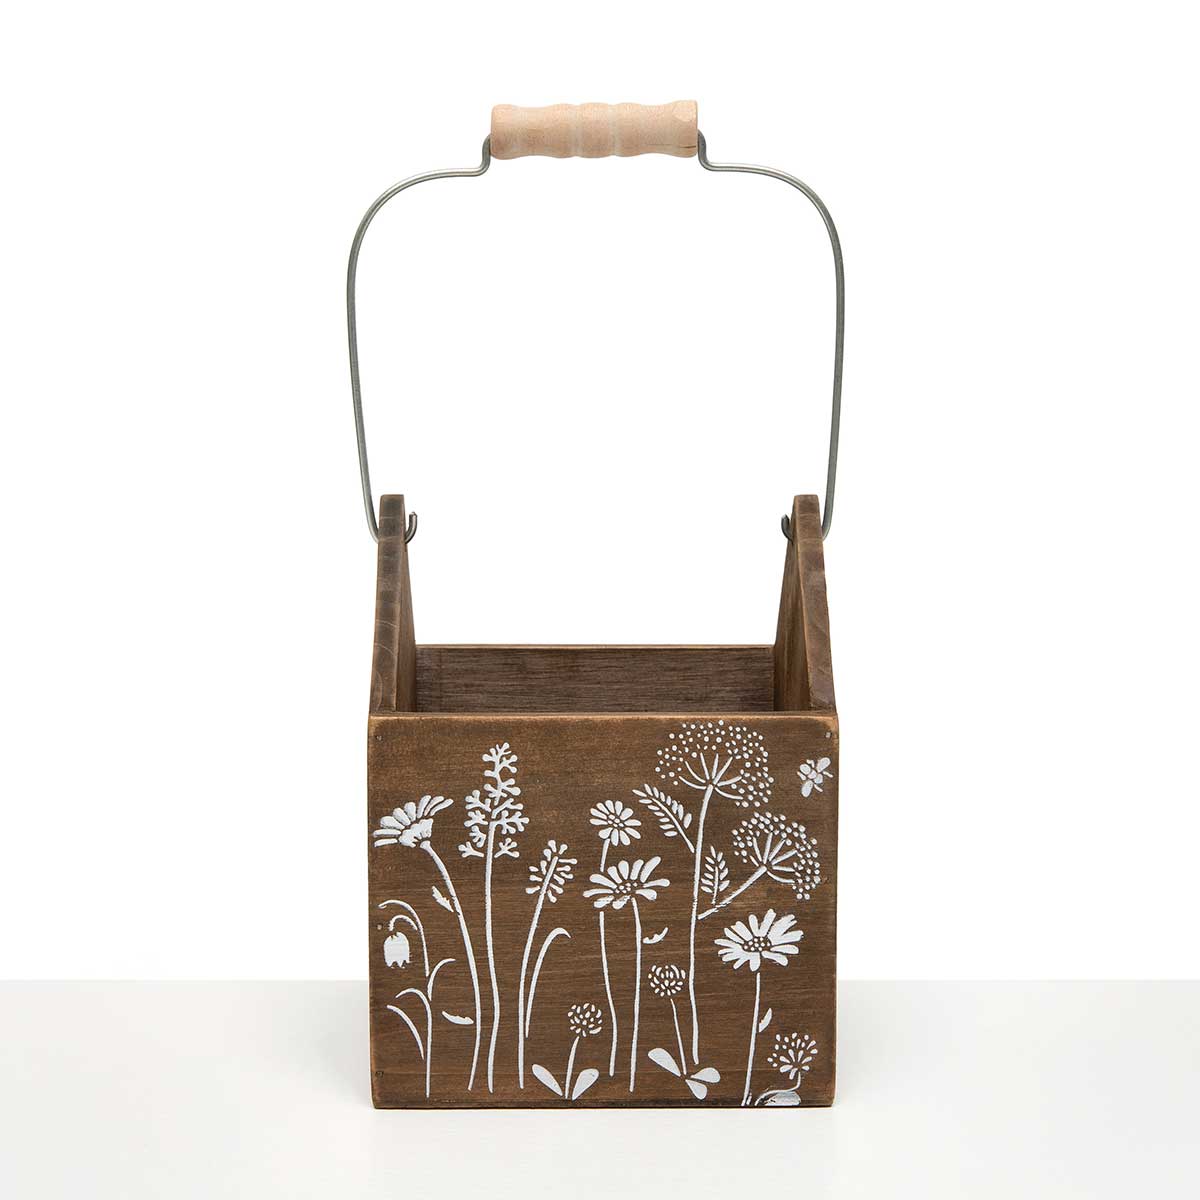 BUCKET SQUARE FLORAL MOTIF MD 5.5IN X 6.5IN BROWN/WHITE